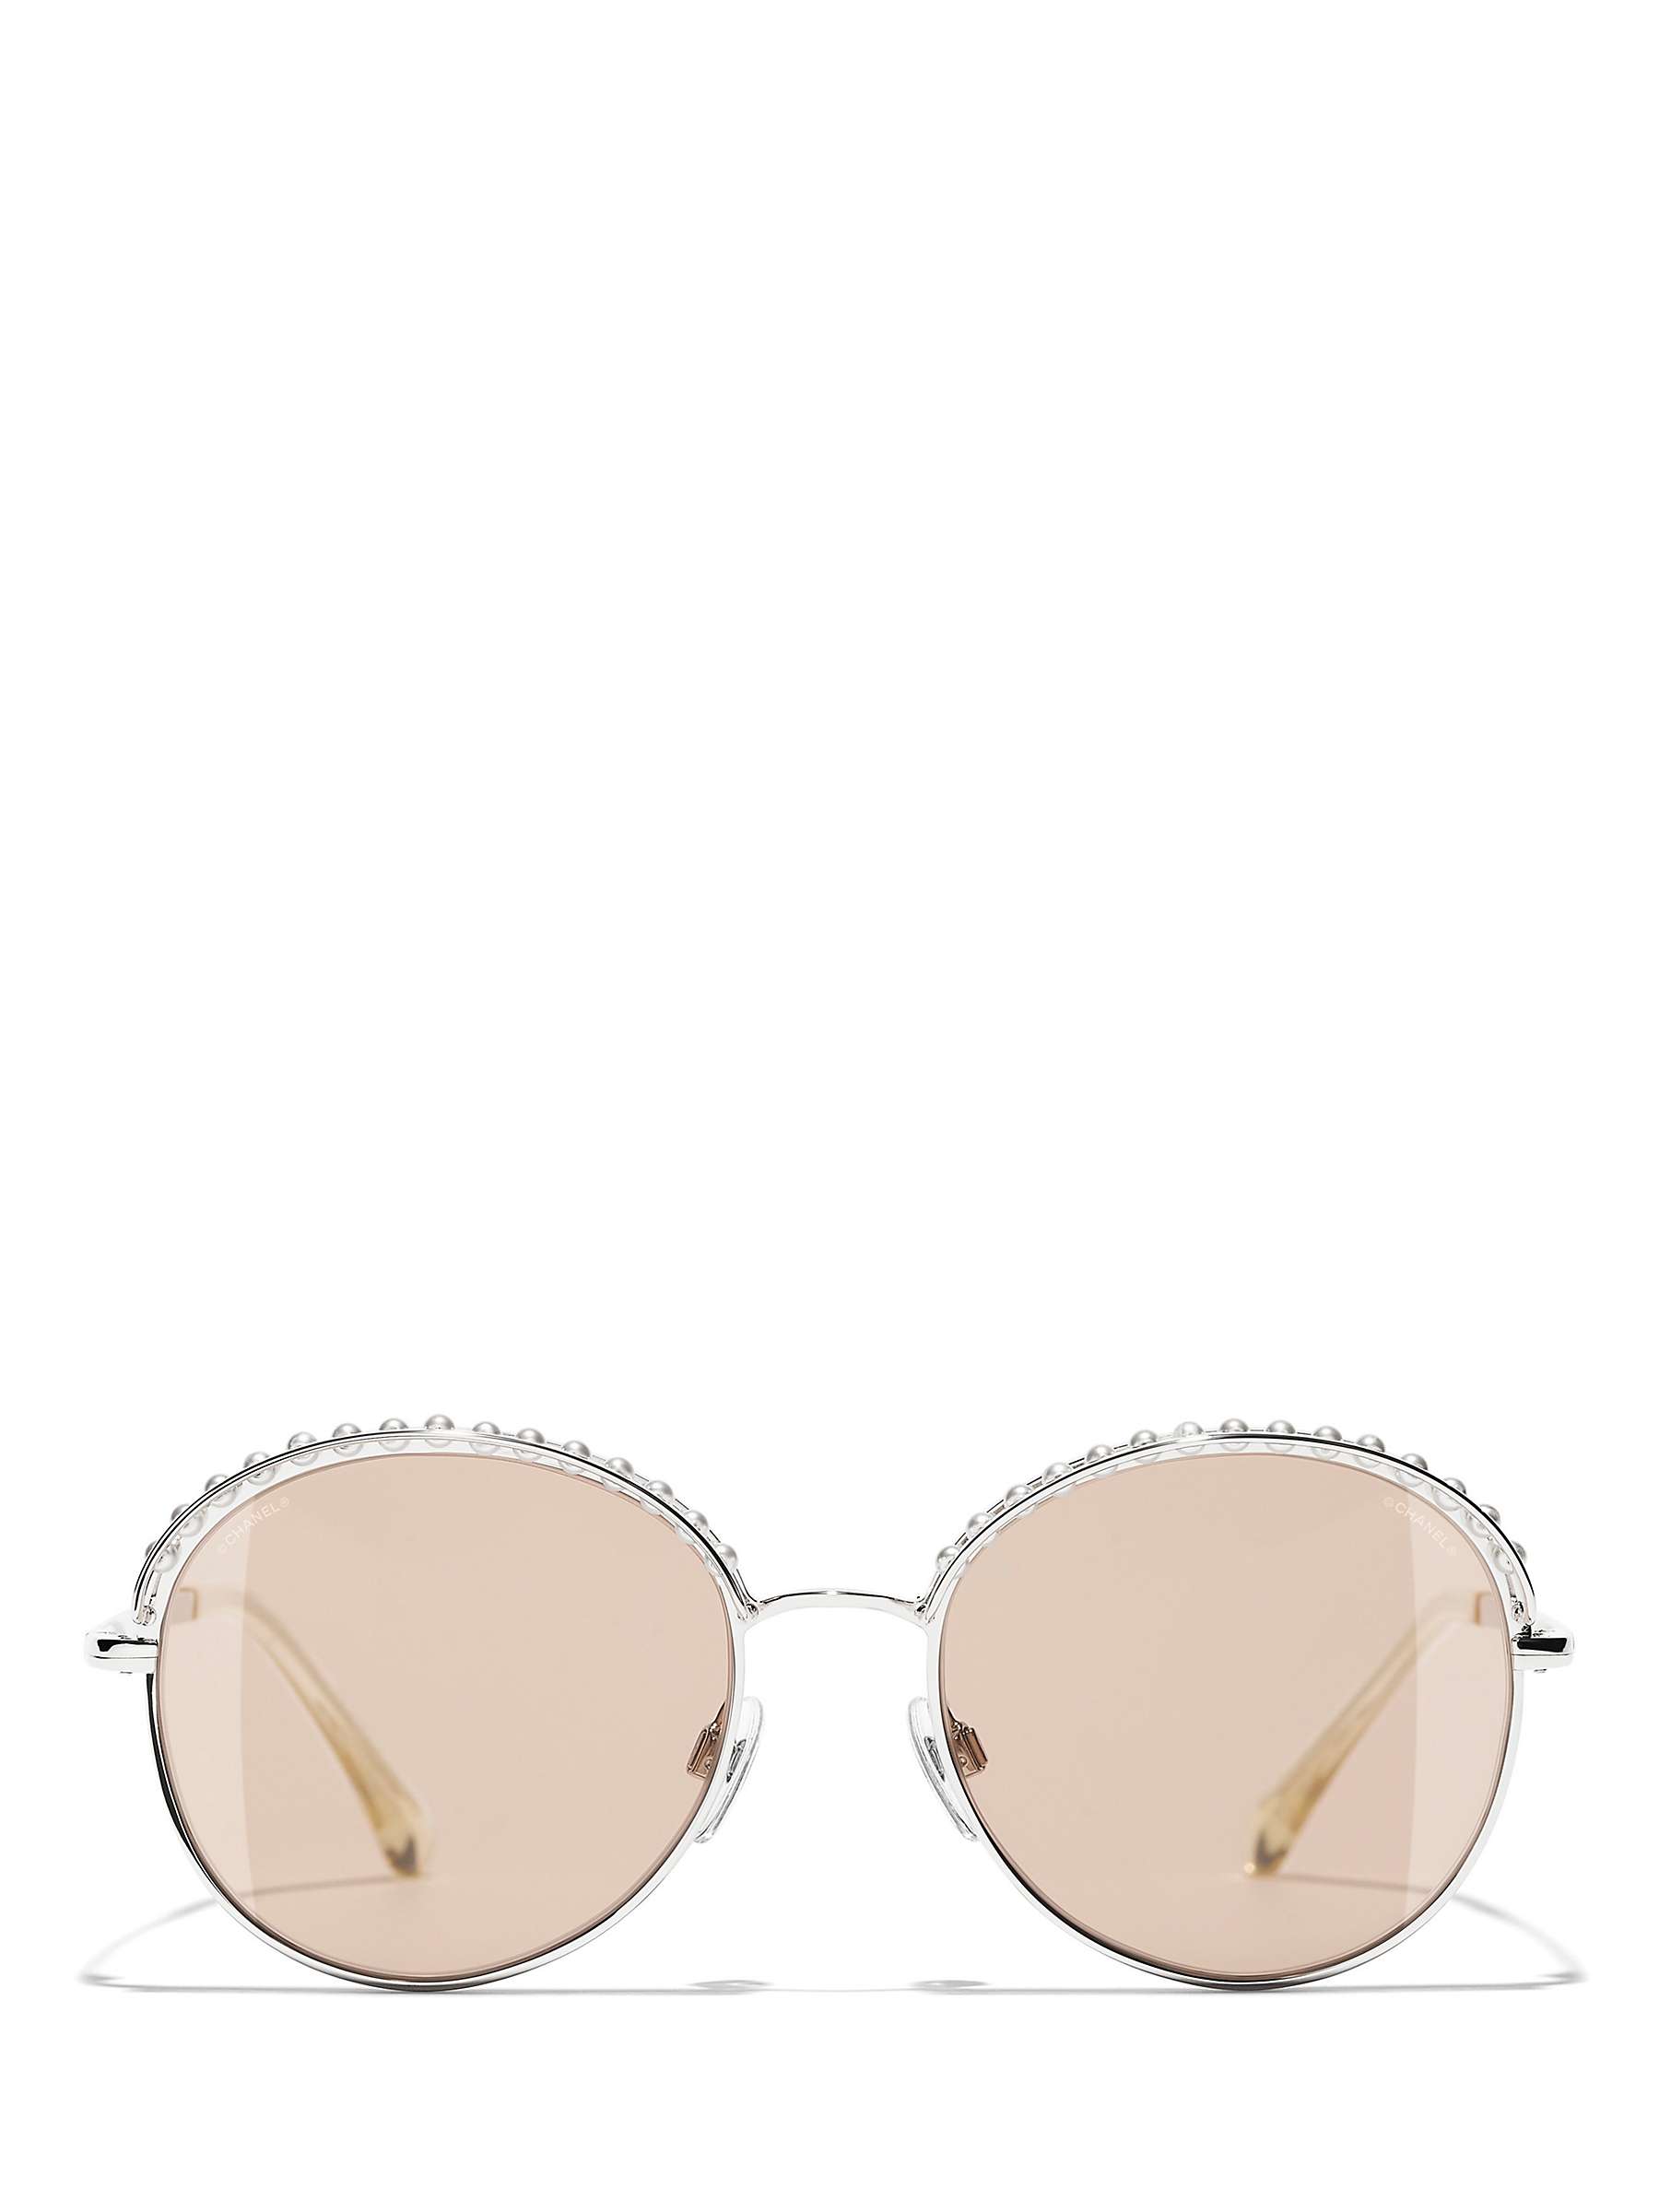 Buy CHANEL Round Sunglasses CH4247H Silver/Blush Online at johnlewis.com